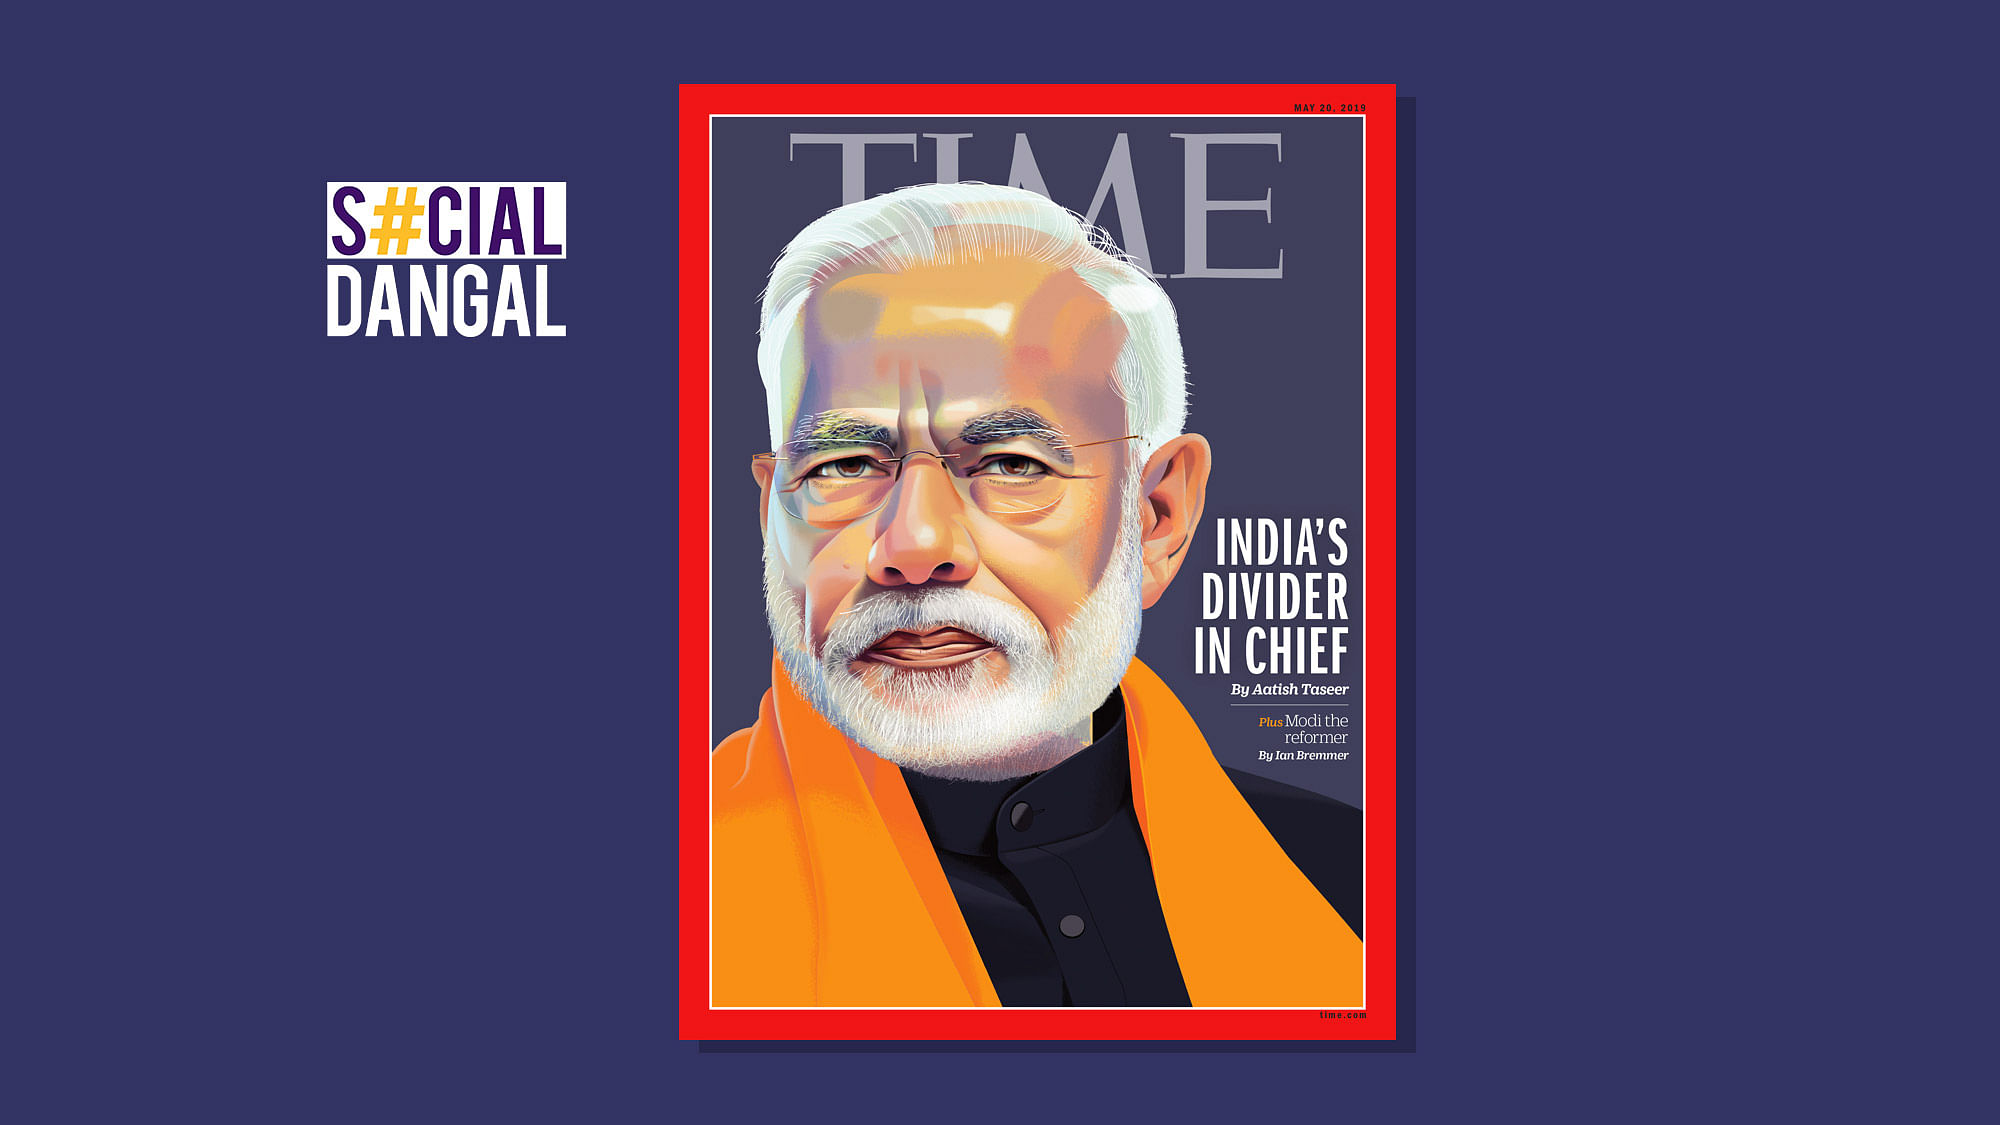 The cover of TIME Magazine called Modi ‘India’s Divider In Chief’.&nbsp;